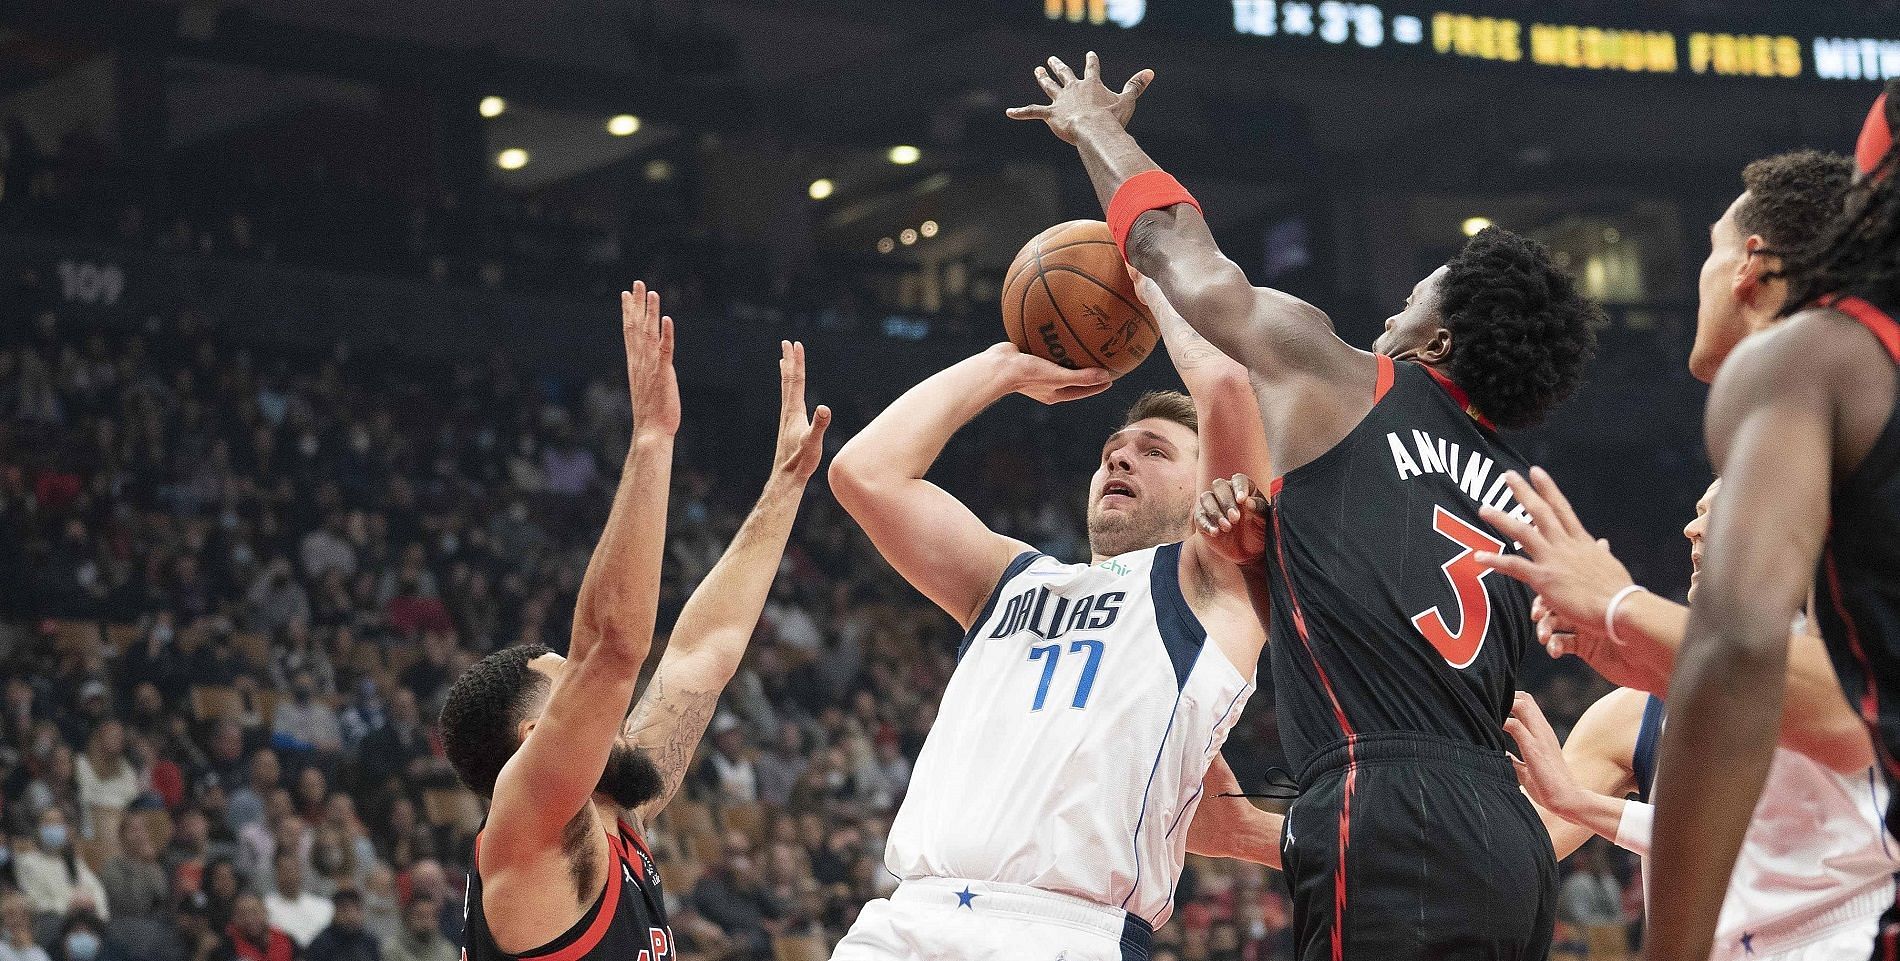 The visiting Toronto Raptors will look to get even with the Dallas Mavericks in their season series on Wednesday. [Photo: NBA.com]